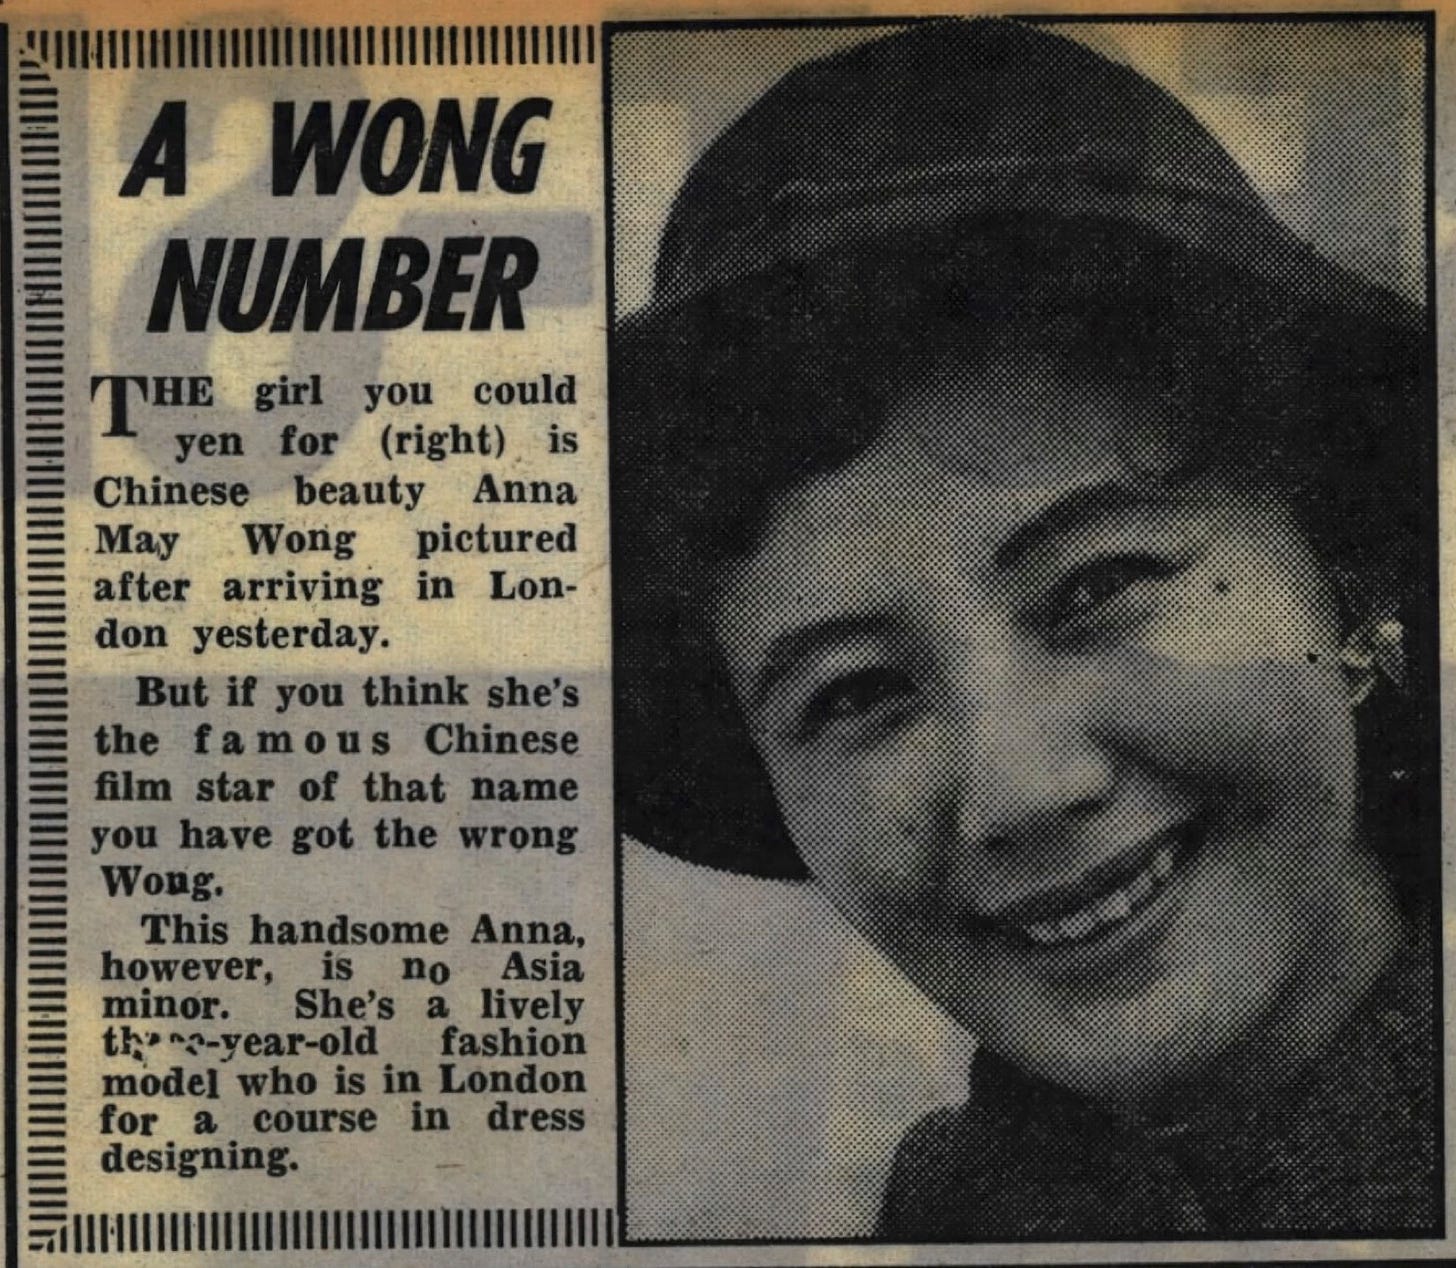 clipping announces the Malaysian Anna May Wong's arrival in London to study dress designing and mentions she shares her name with the actress